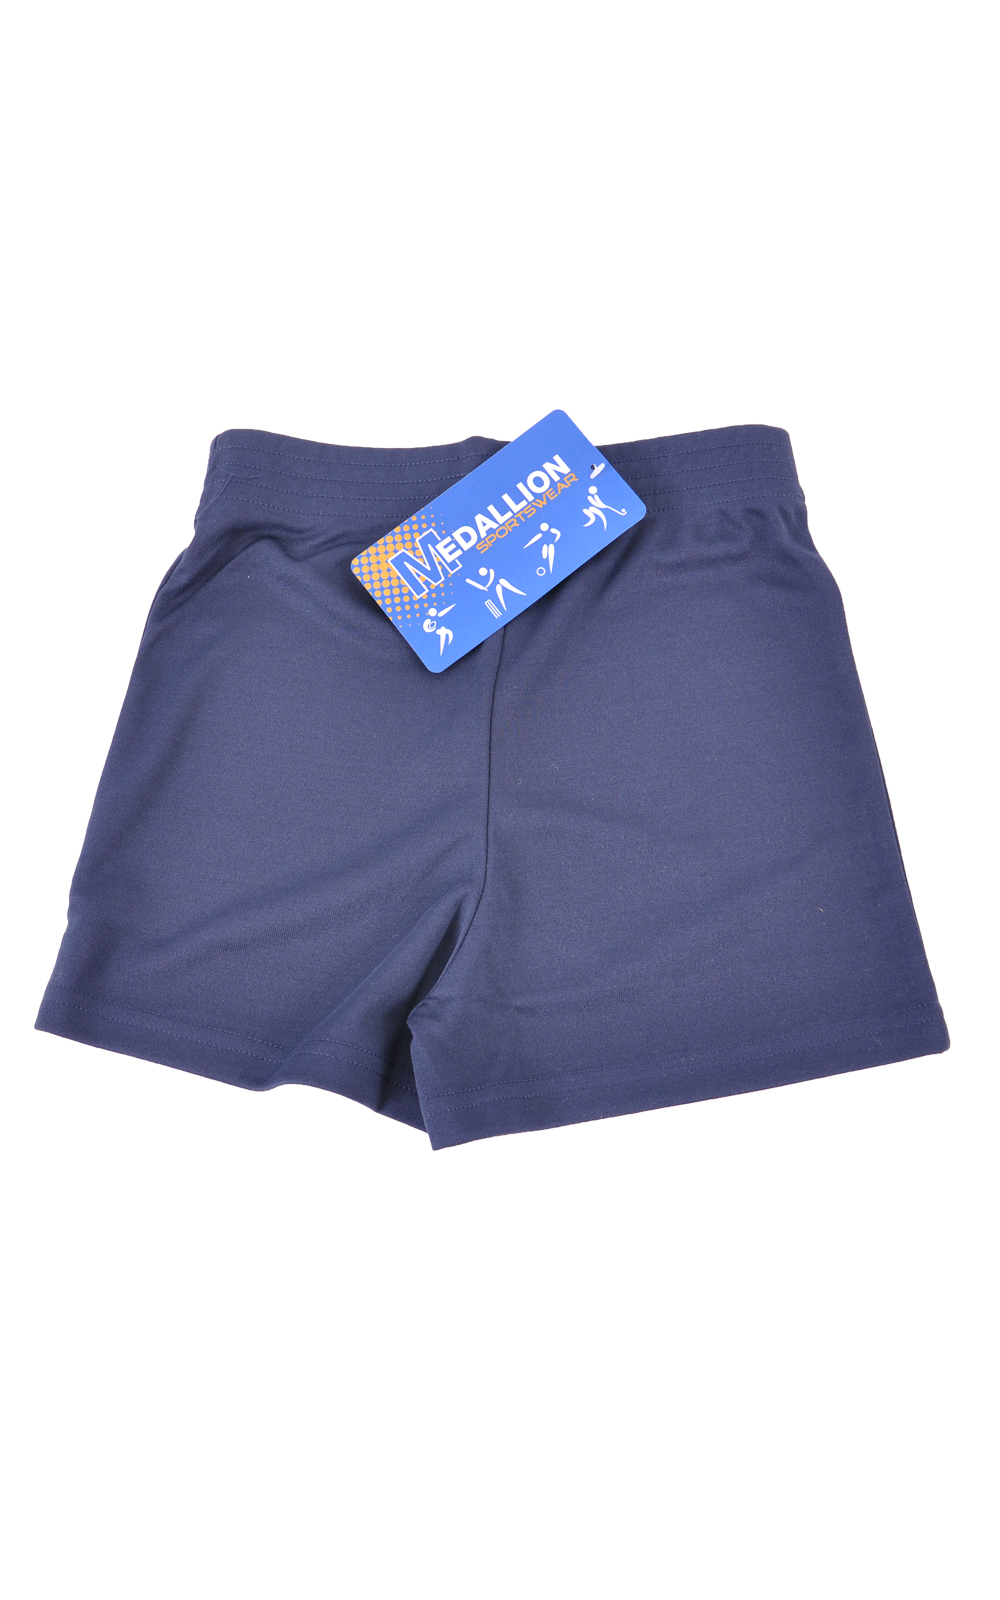 S&T Moore. Girls Game Bowden Shorts - Medallion